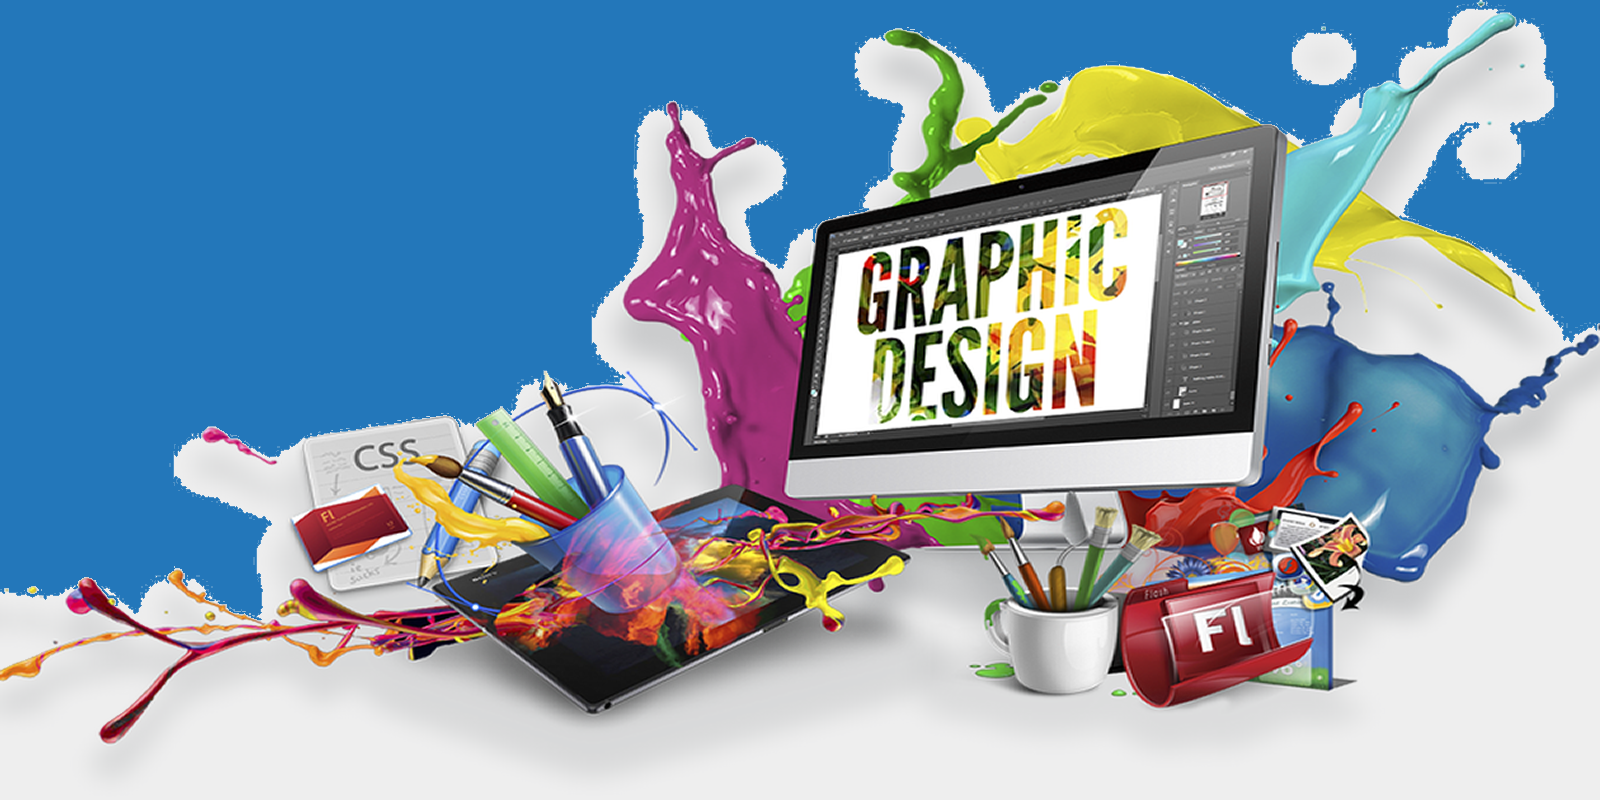 Amekom Systems your partner in Graphic design and printing